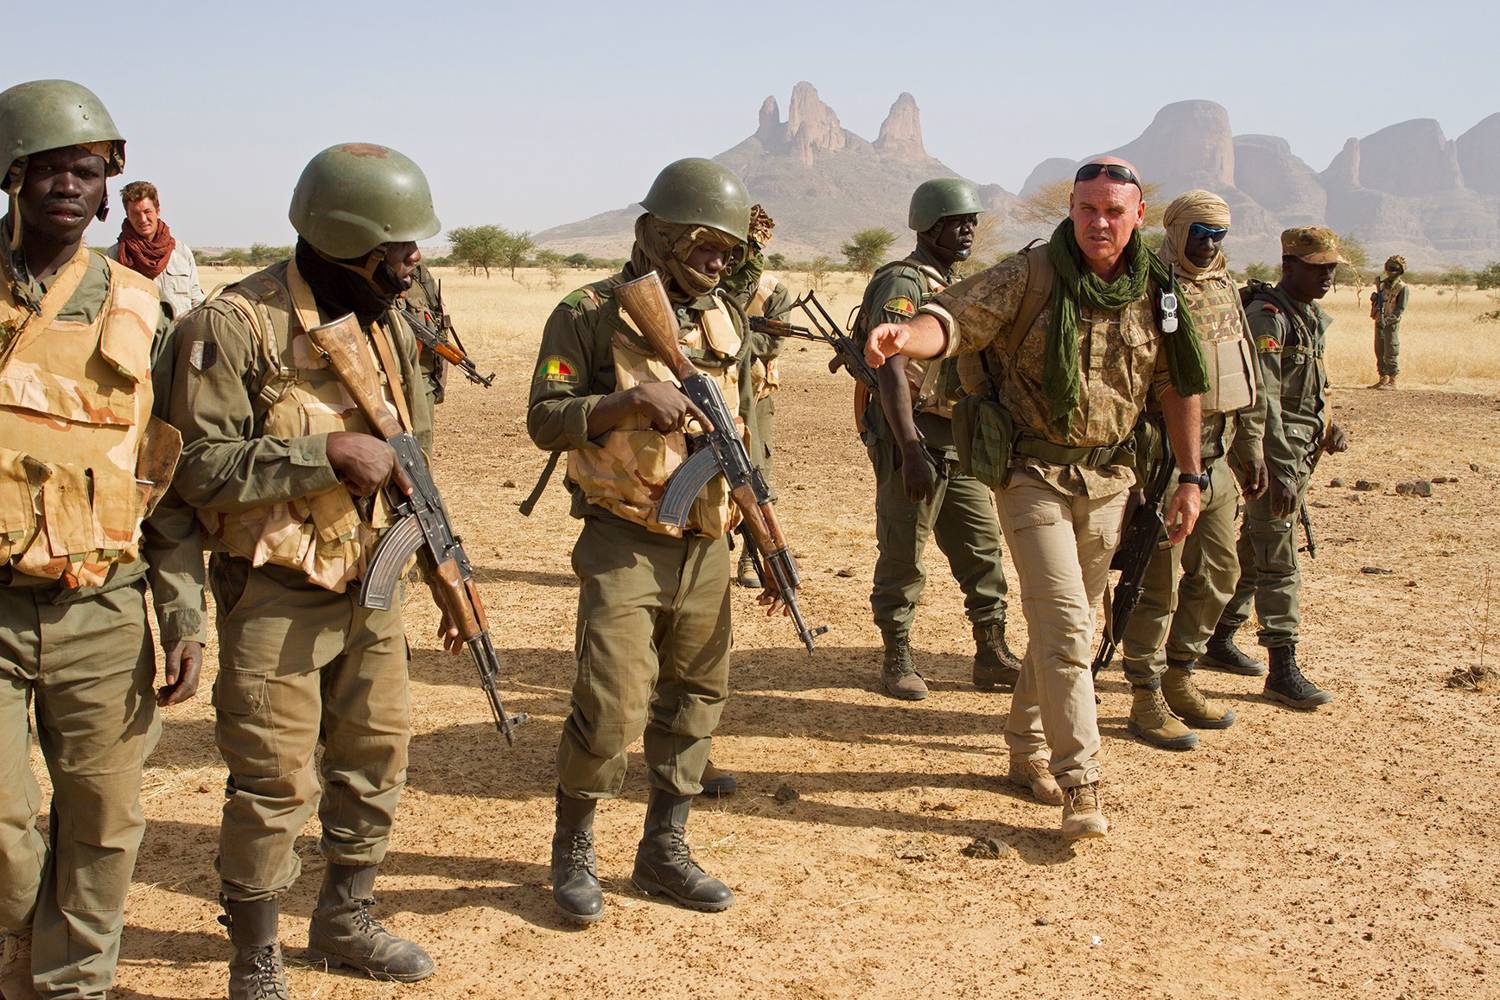 Rory Young, the principal trainer from Chengeta Wildlife trains local rangers and Malian armed forces in the Gourma region. Nigel Kuhn, Chengeta Wildlife